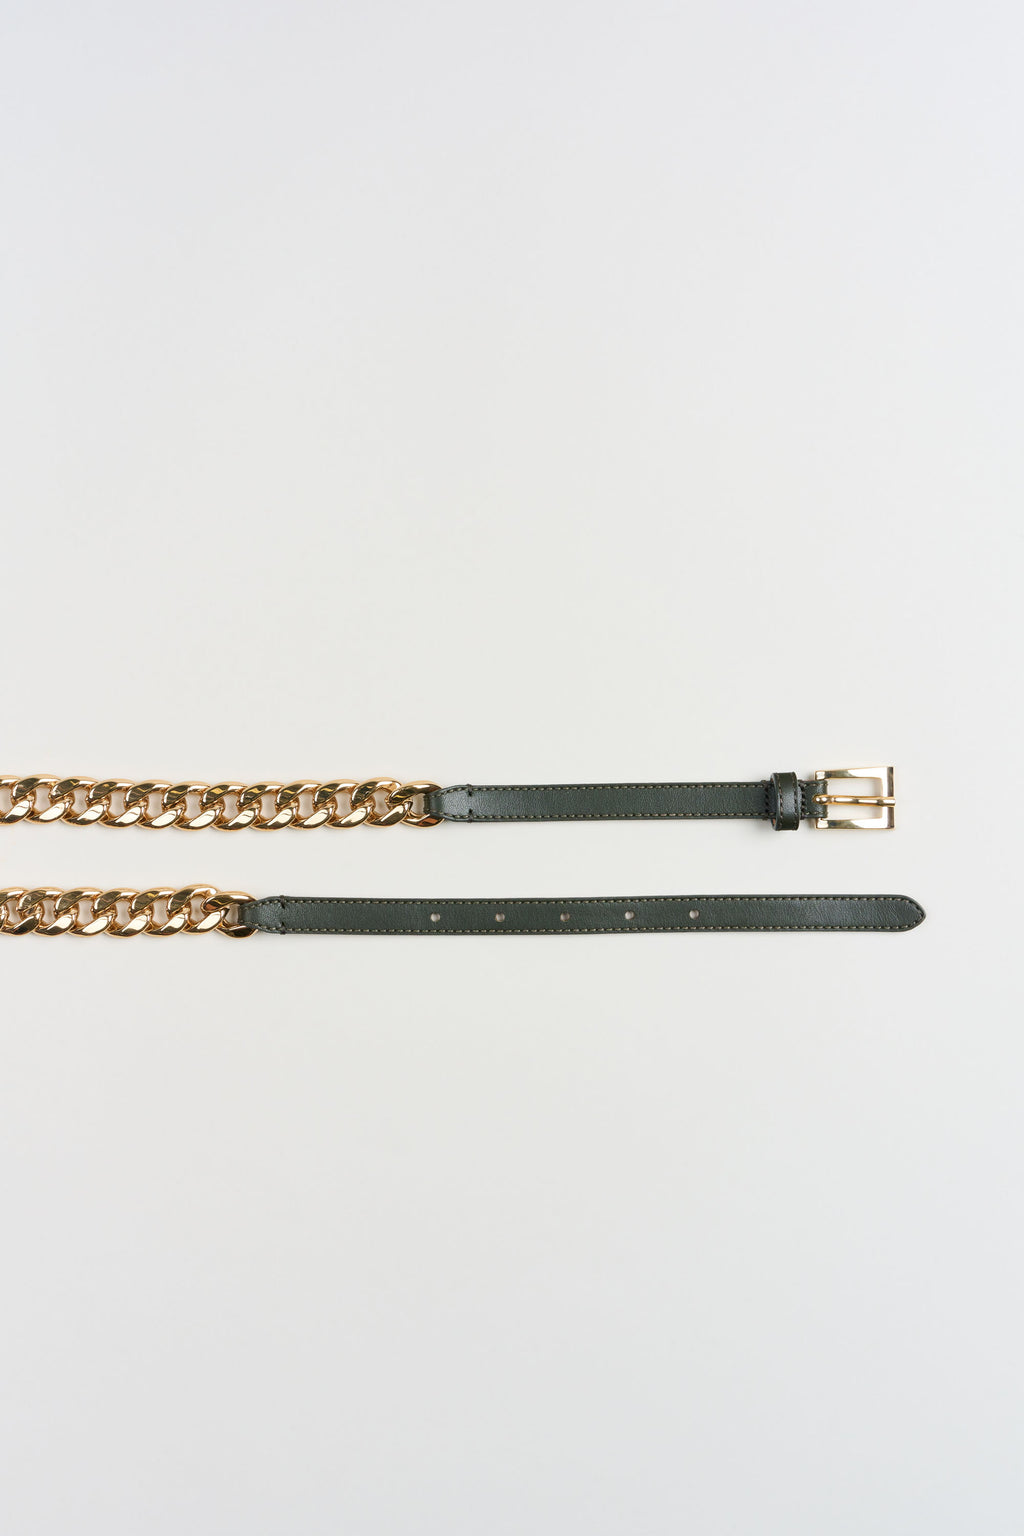 Eyra Layered Chain Belt-Gold – YG COLLECTION